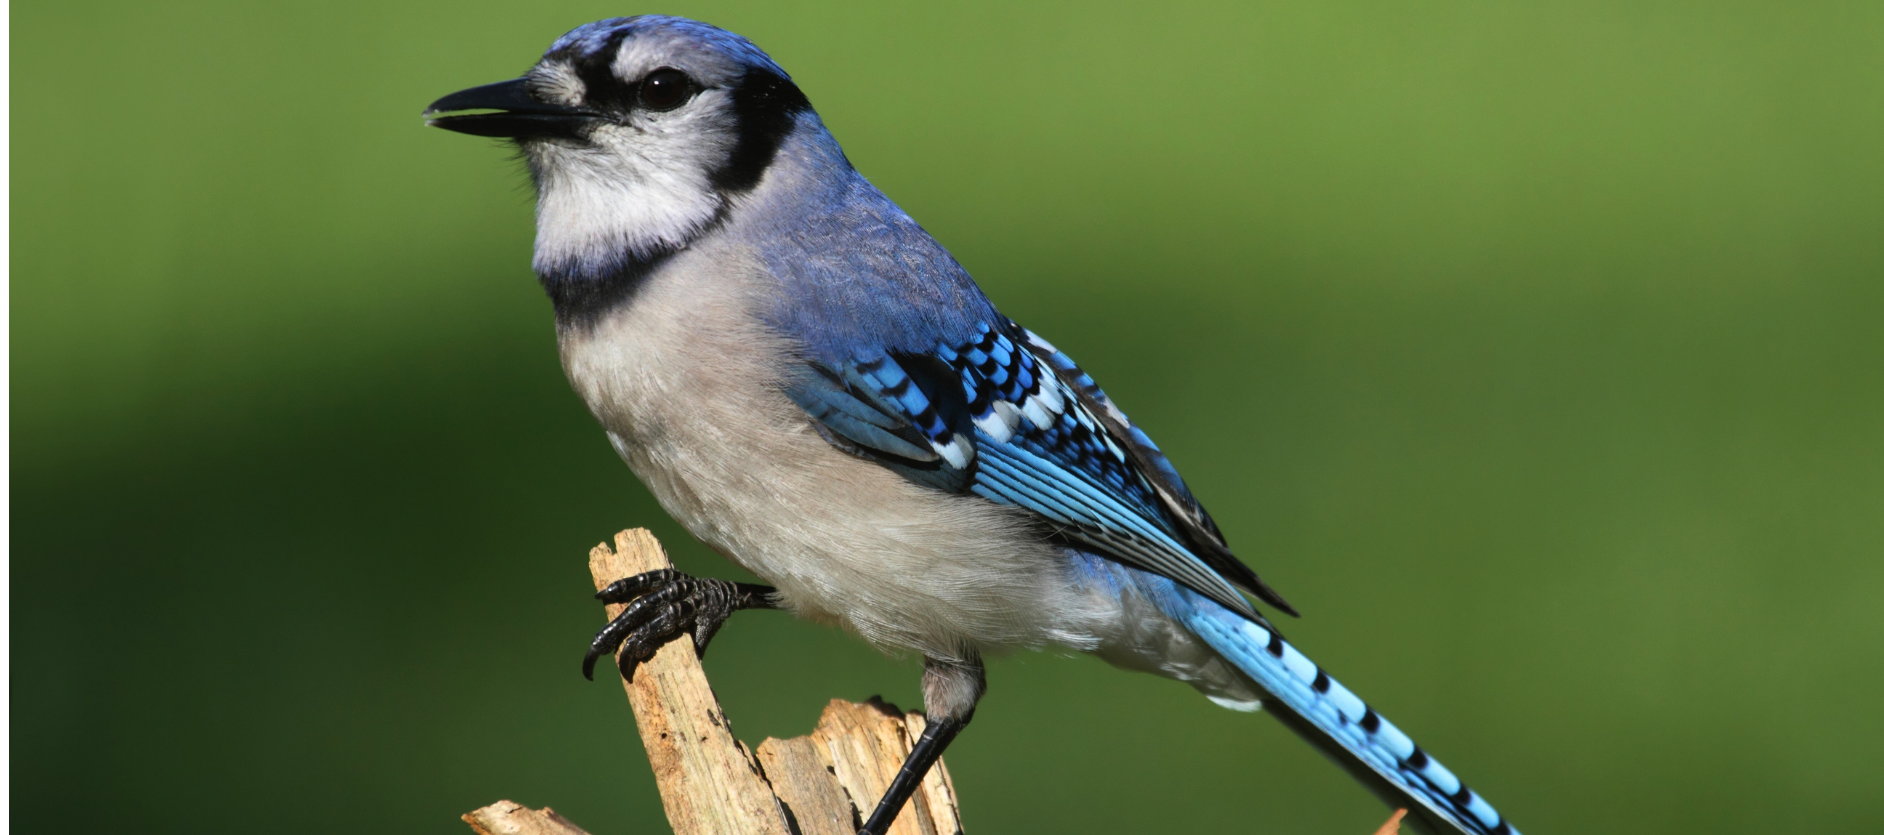 what does a blue jay symbolize in the bible